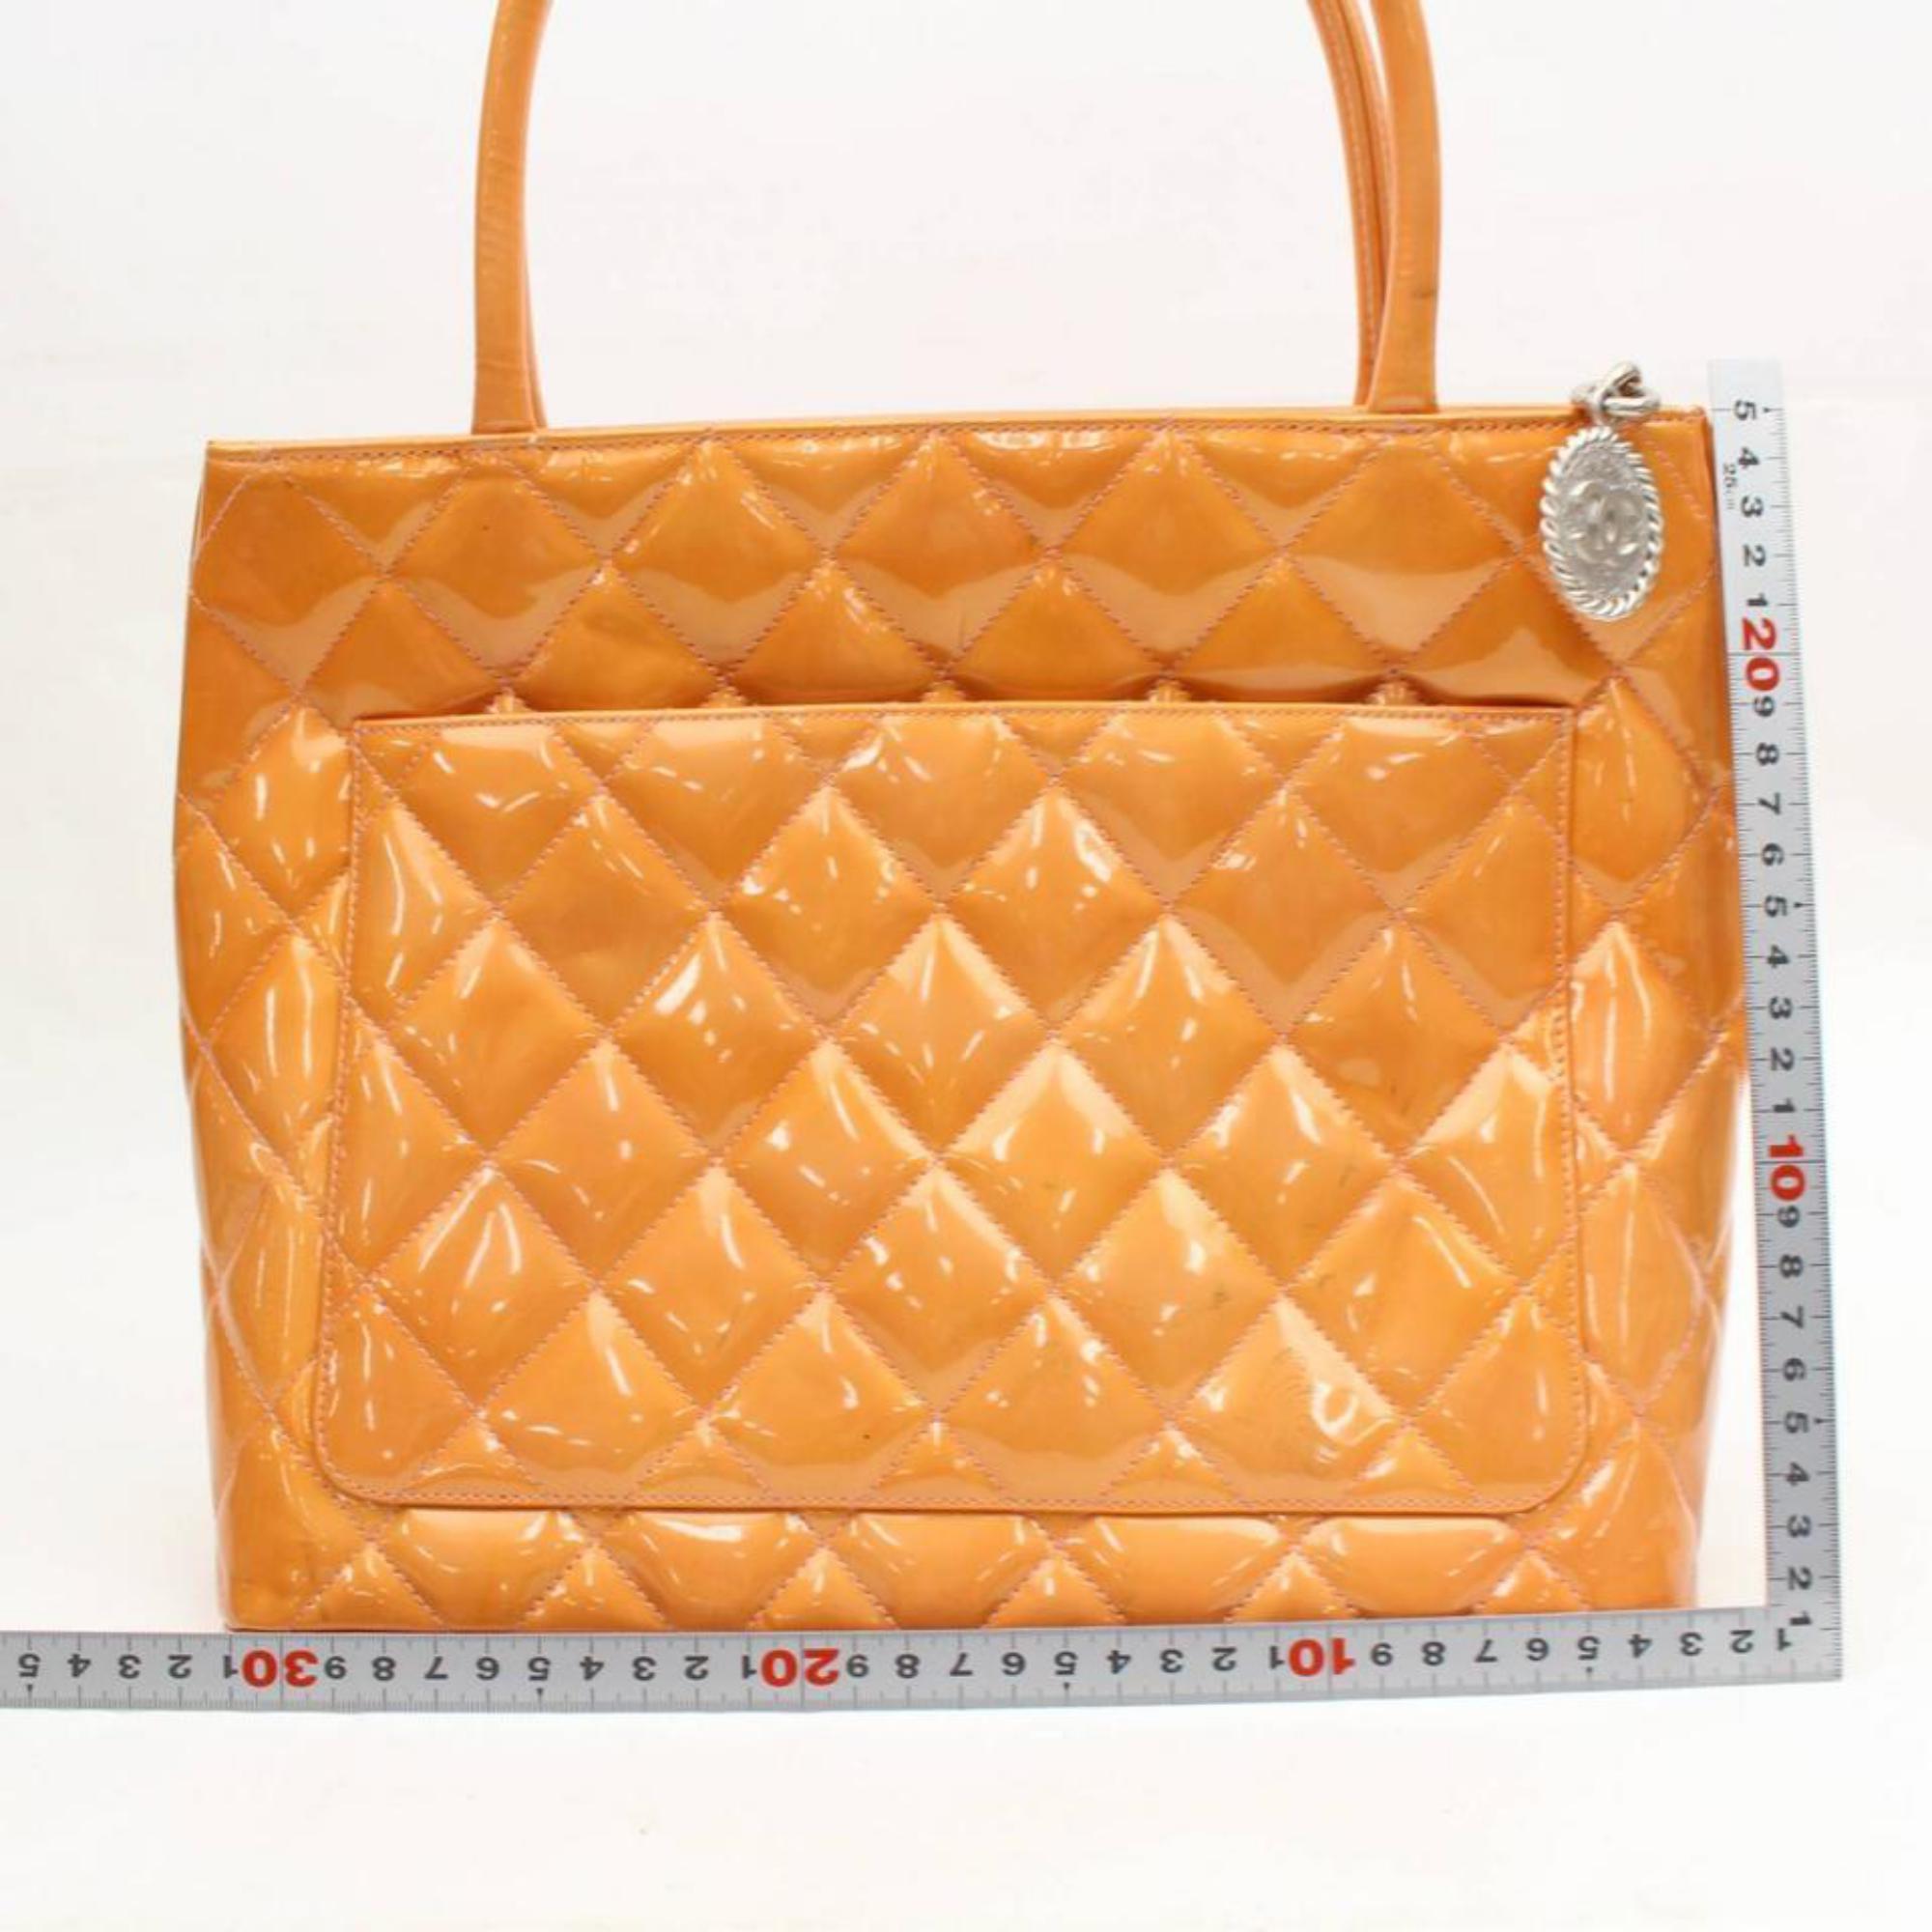 Chanel Médallion Quilted Zip Tote 868715 Orange Patent Leather Satchel For Sale 2